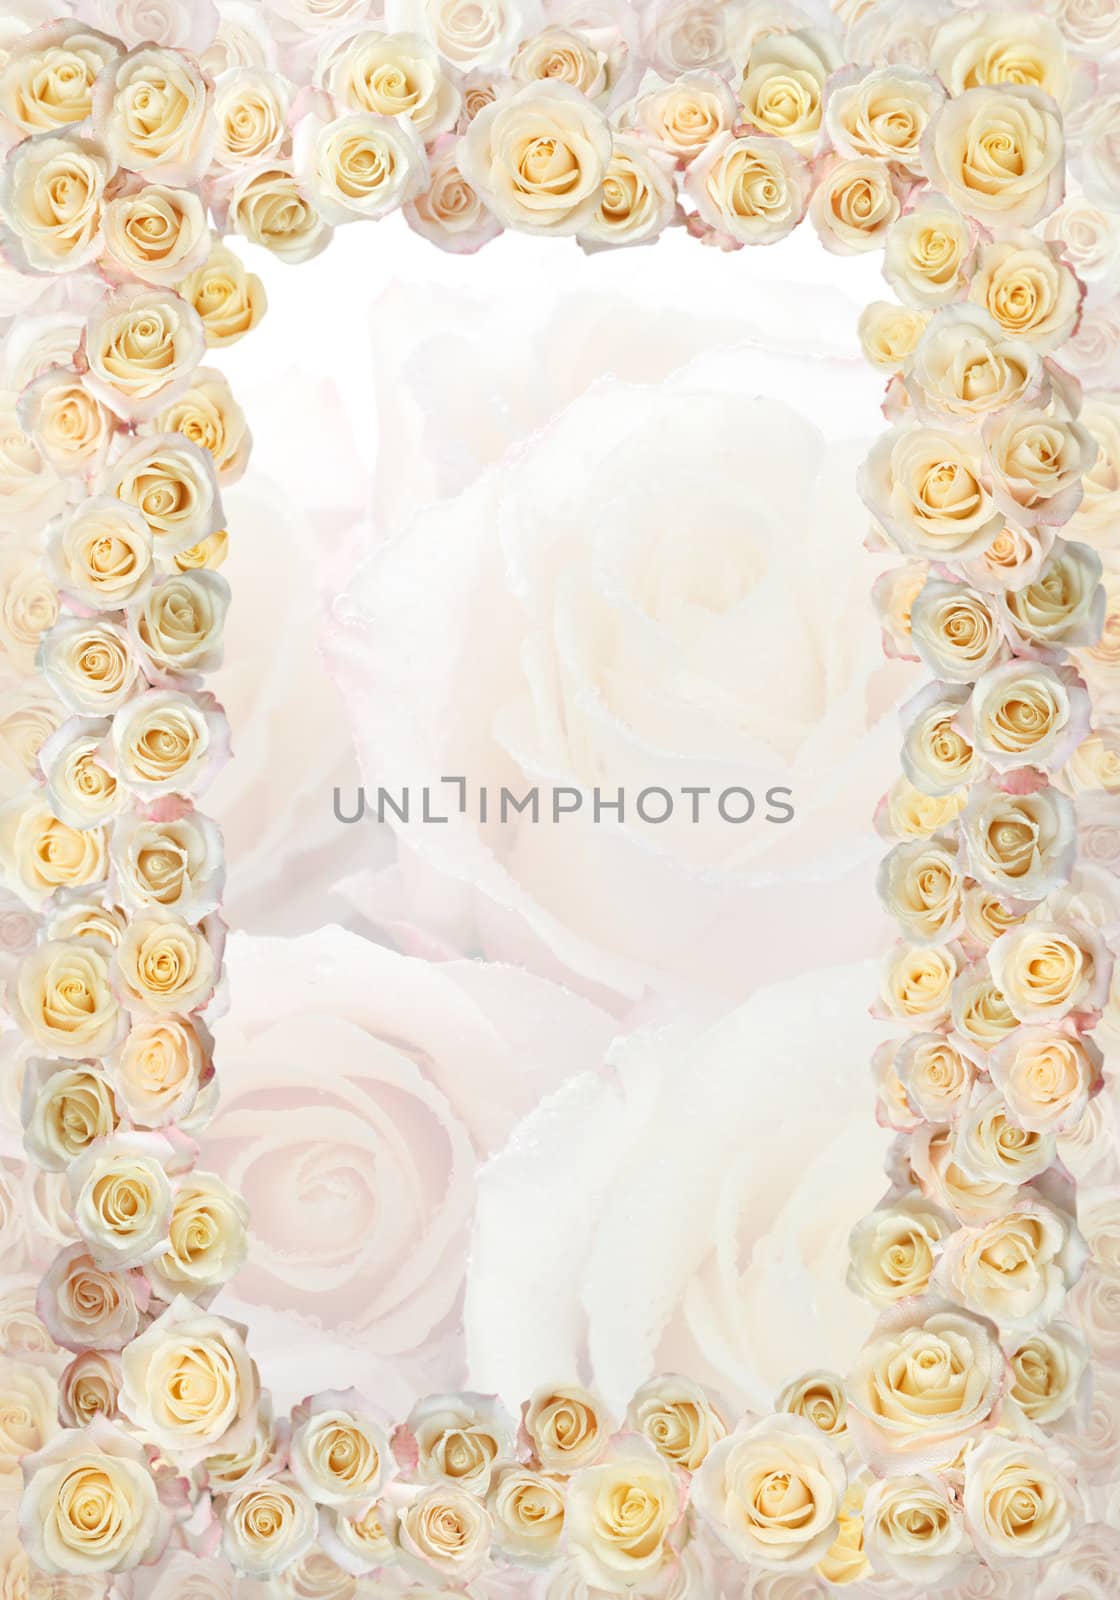 Frame of roses wedding / greetings on the occasion